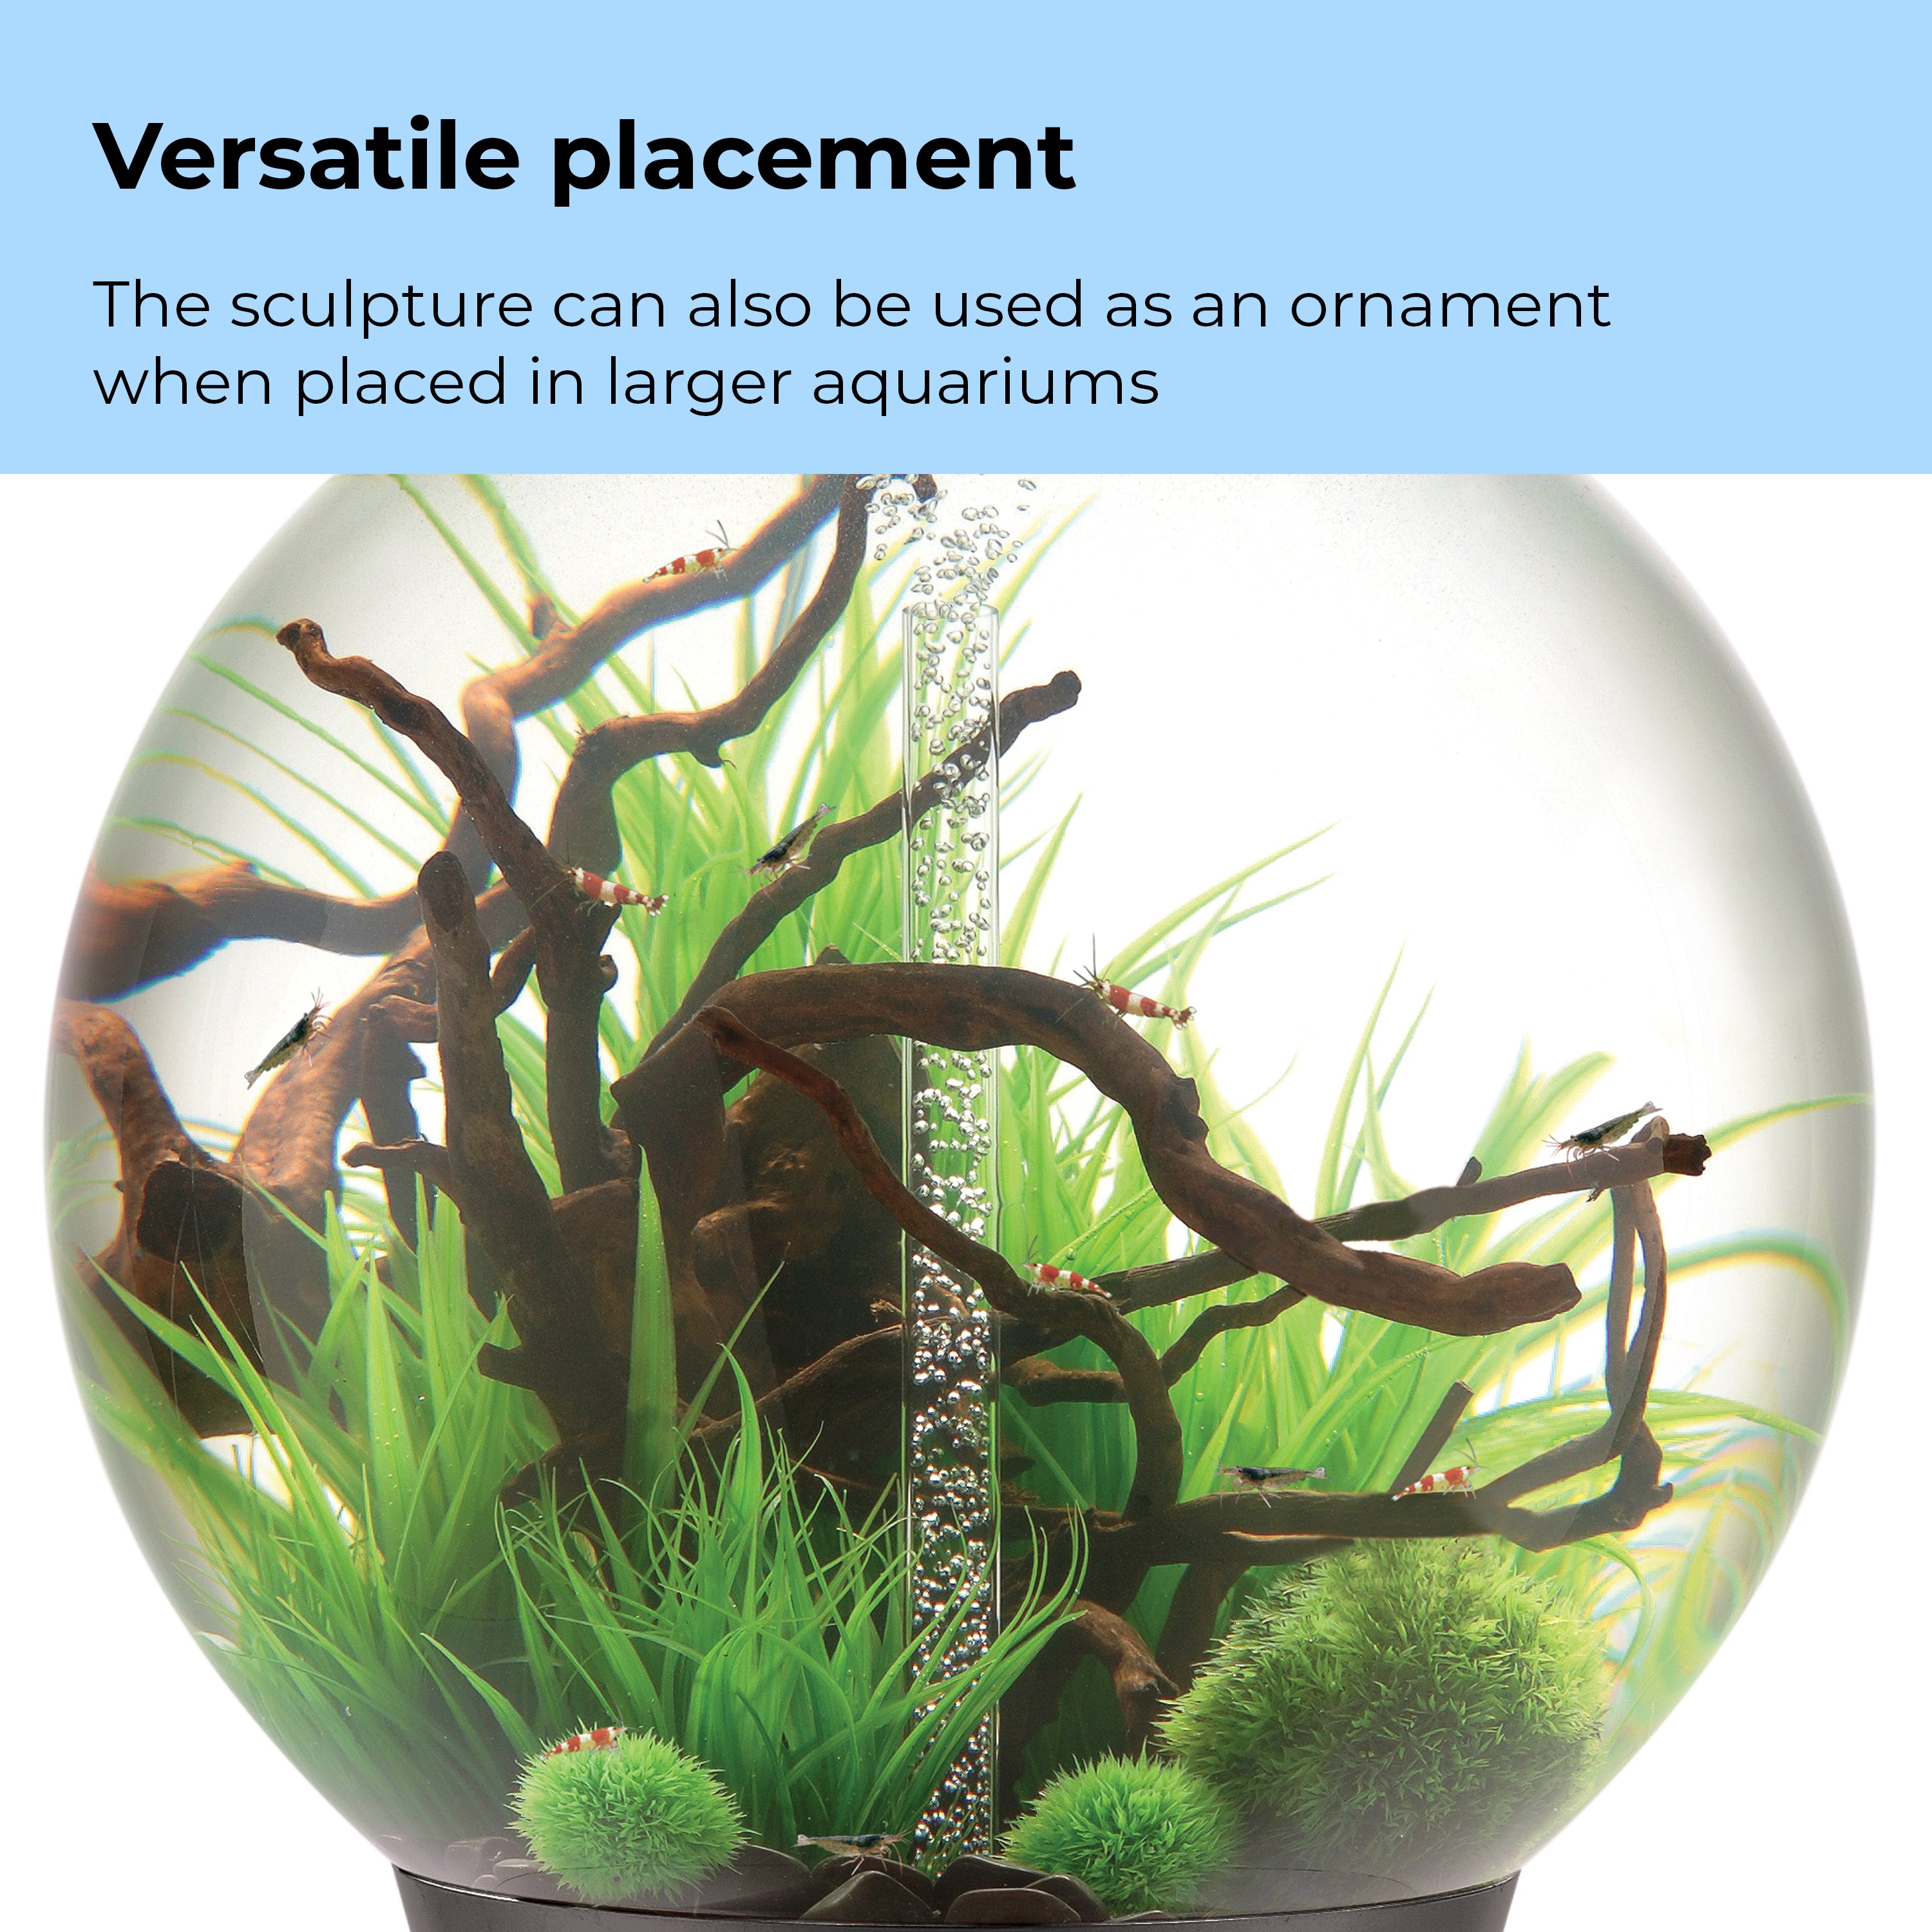 Medium Grass Ring can be used as ornament in larger aquariums